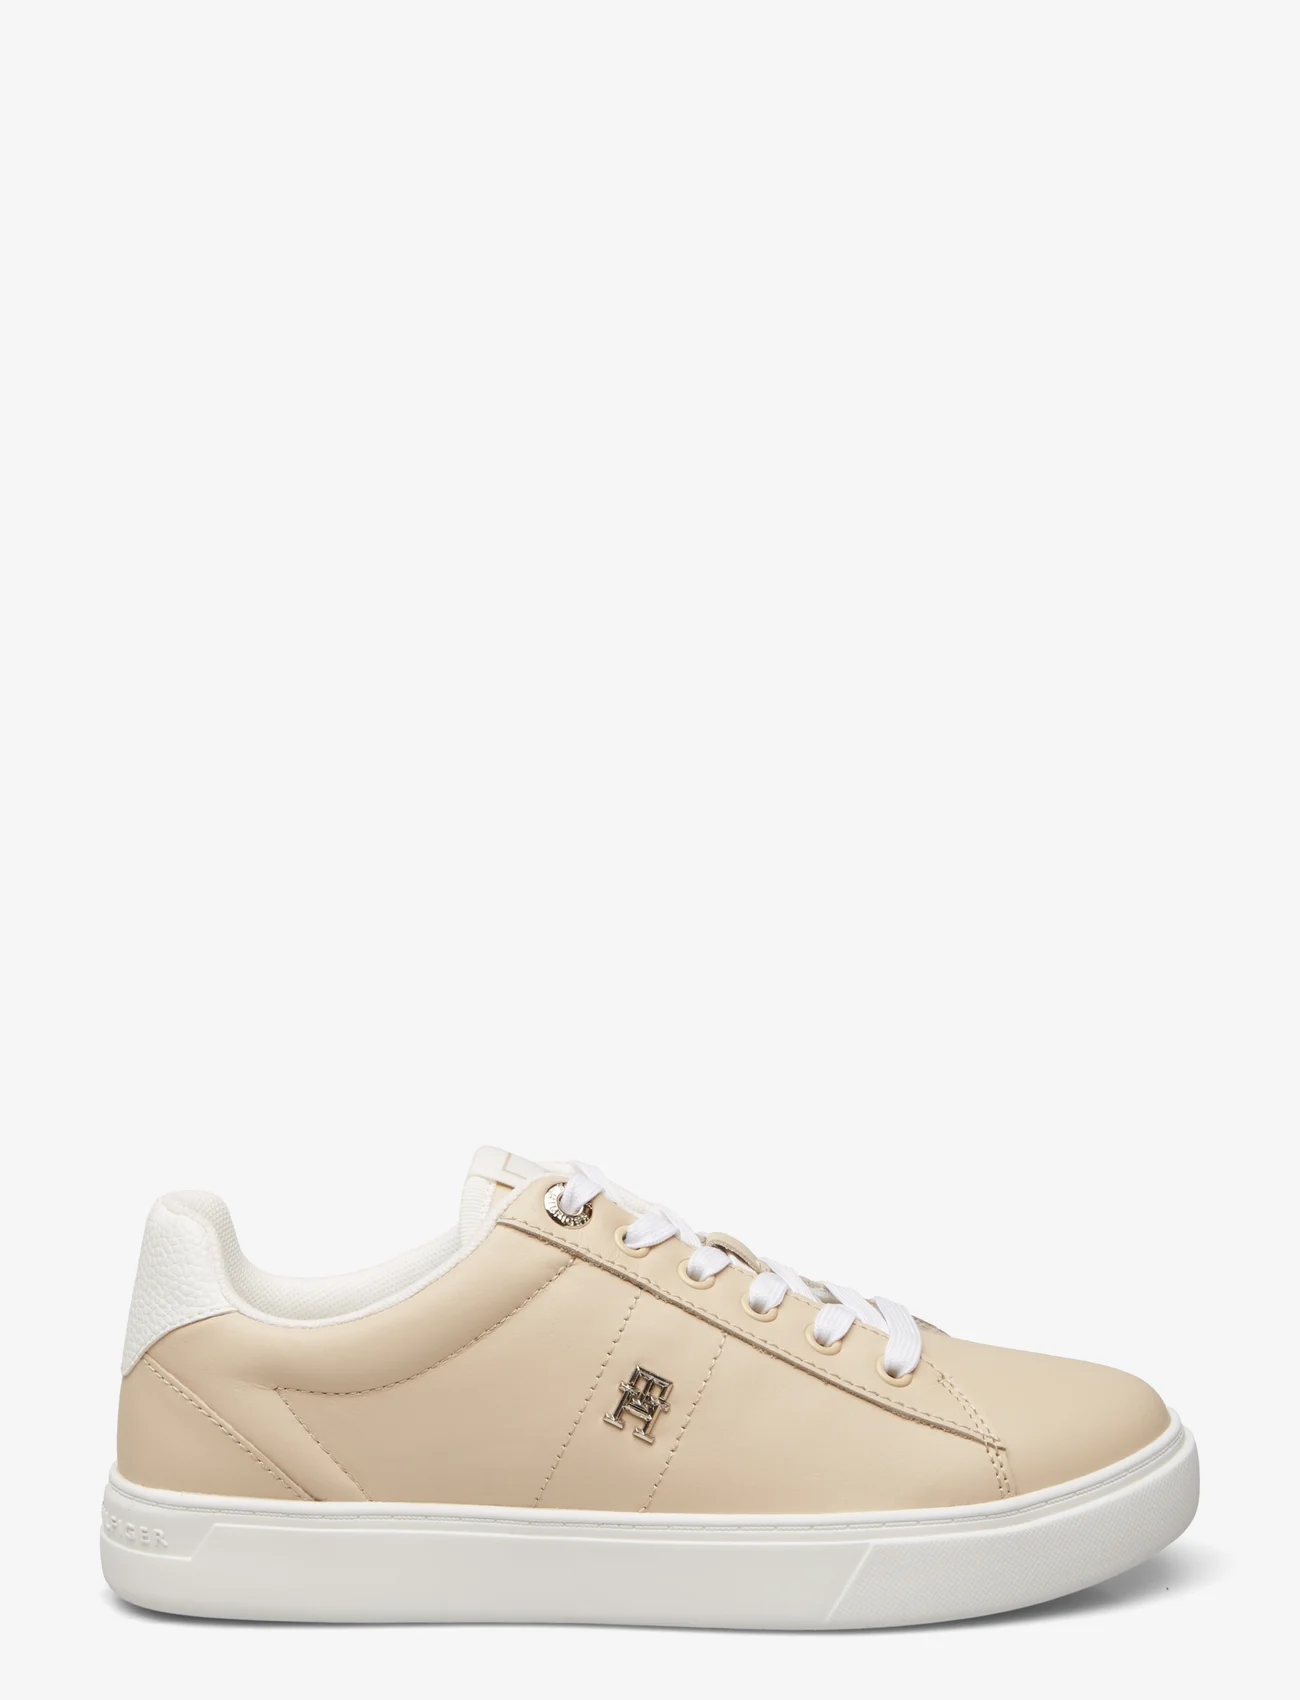 Tommy Hilfiger - ESSENTIAL ELEVATED COURT SNEAKER - lage sneakers - white clay - 1